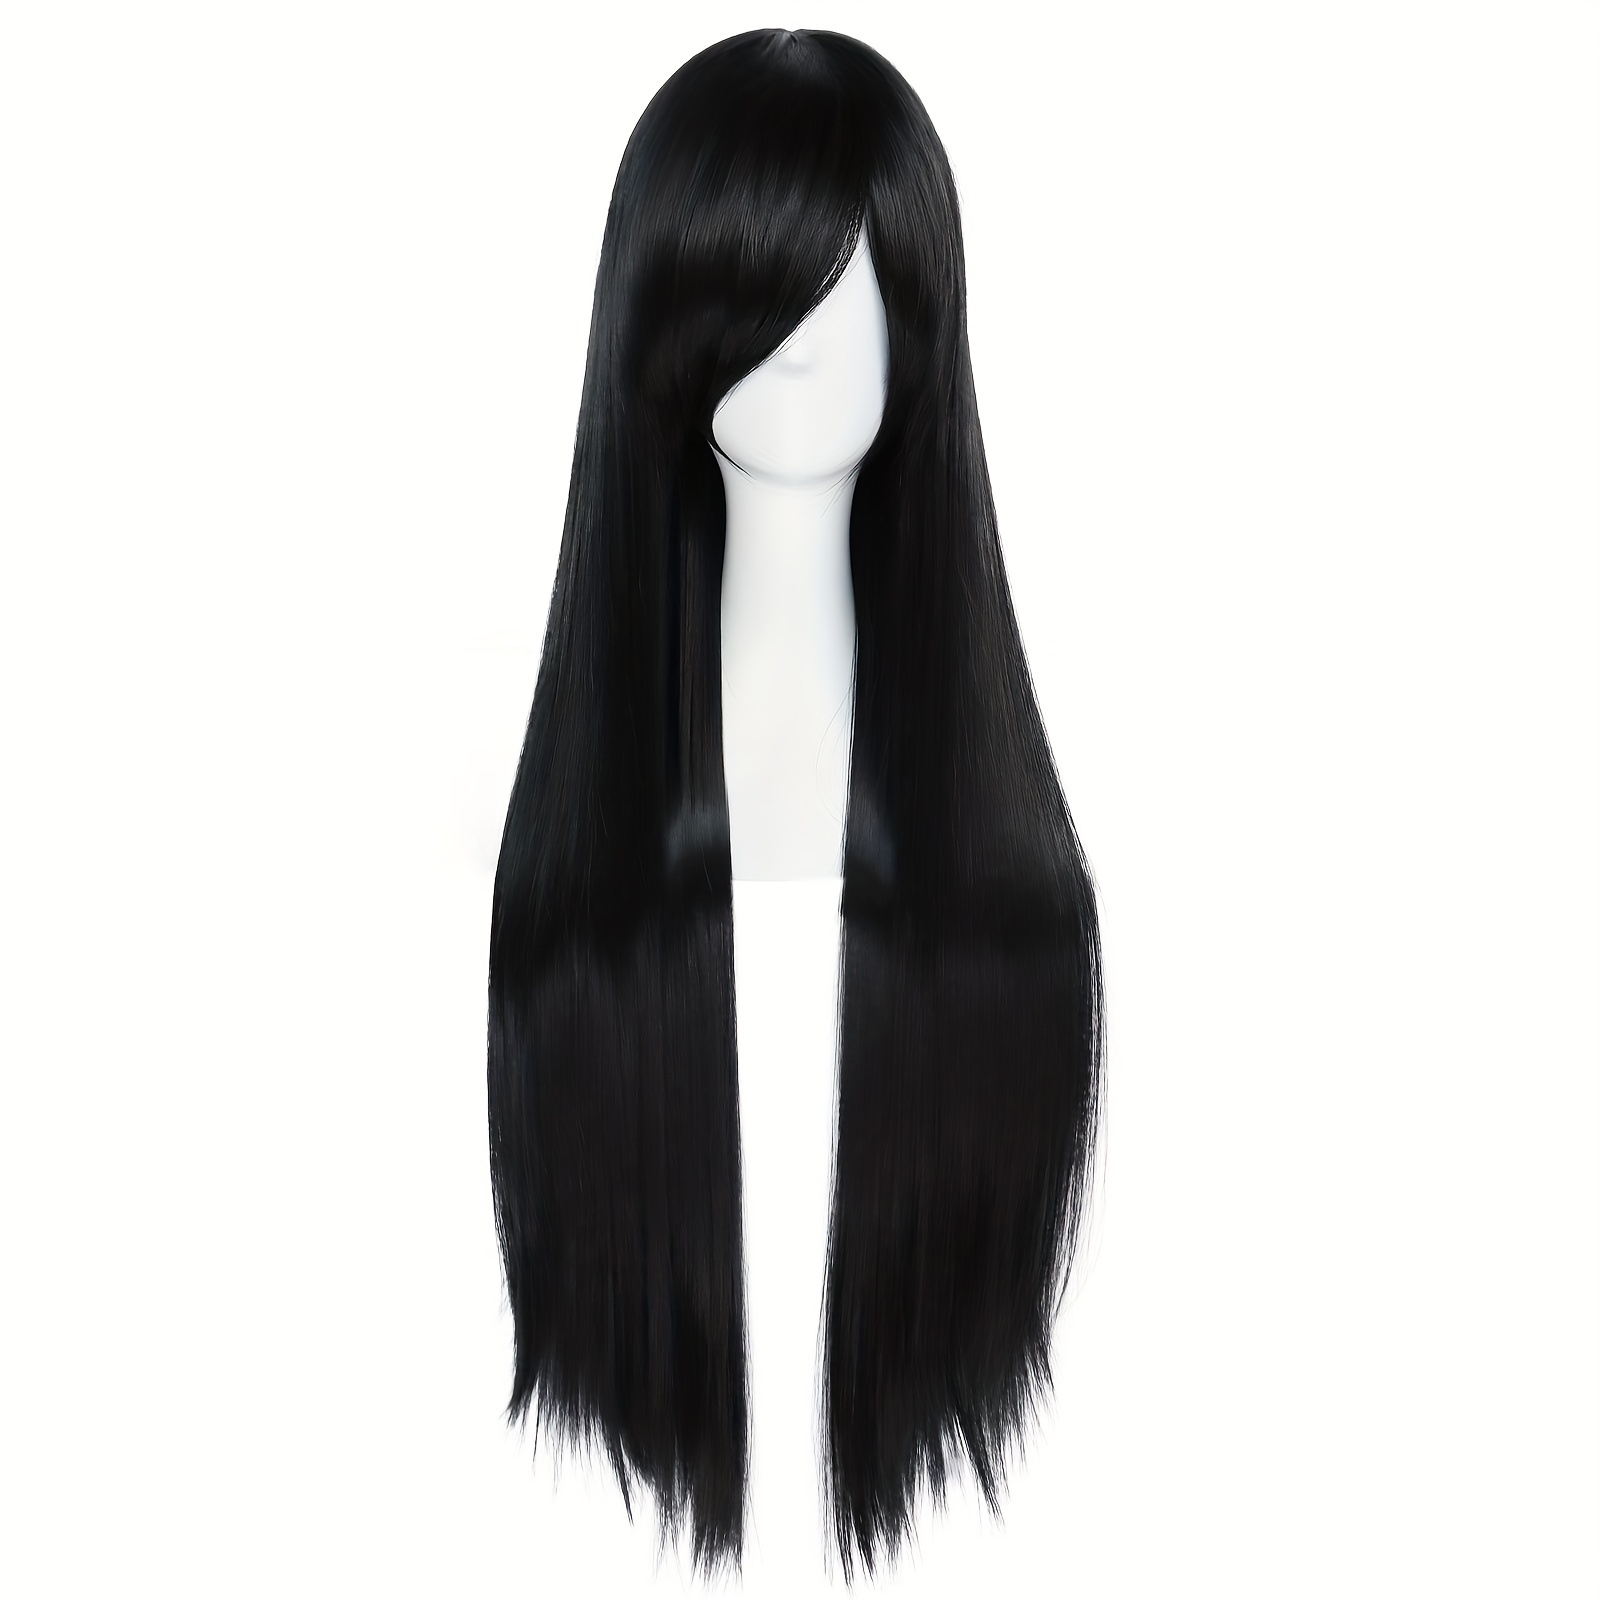 Women 80cm Long Straight Wigs Fashion Cosplay Costume Anime Hair Party Full  Wigs